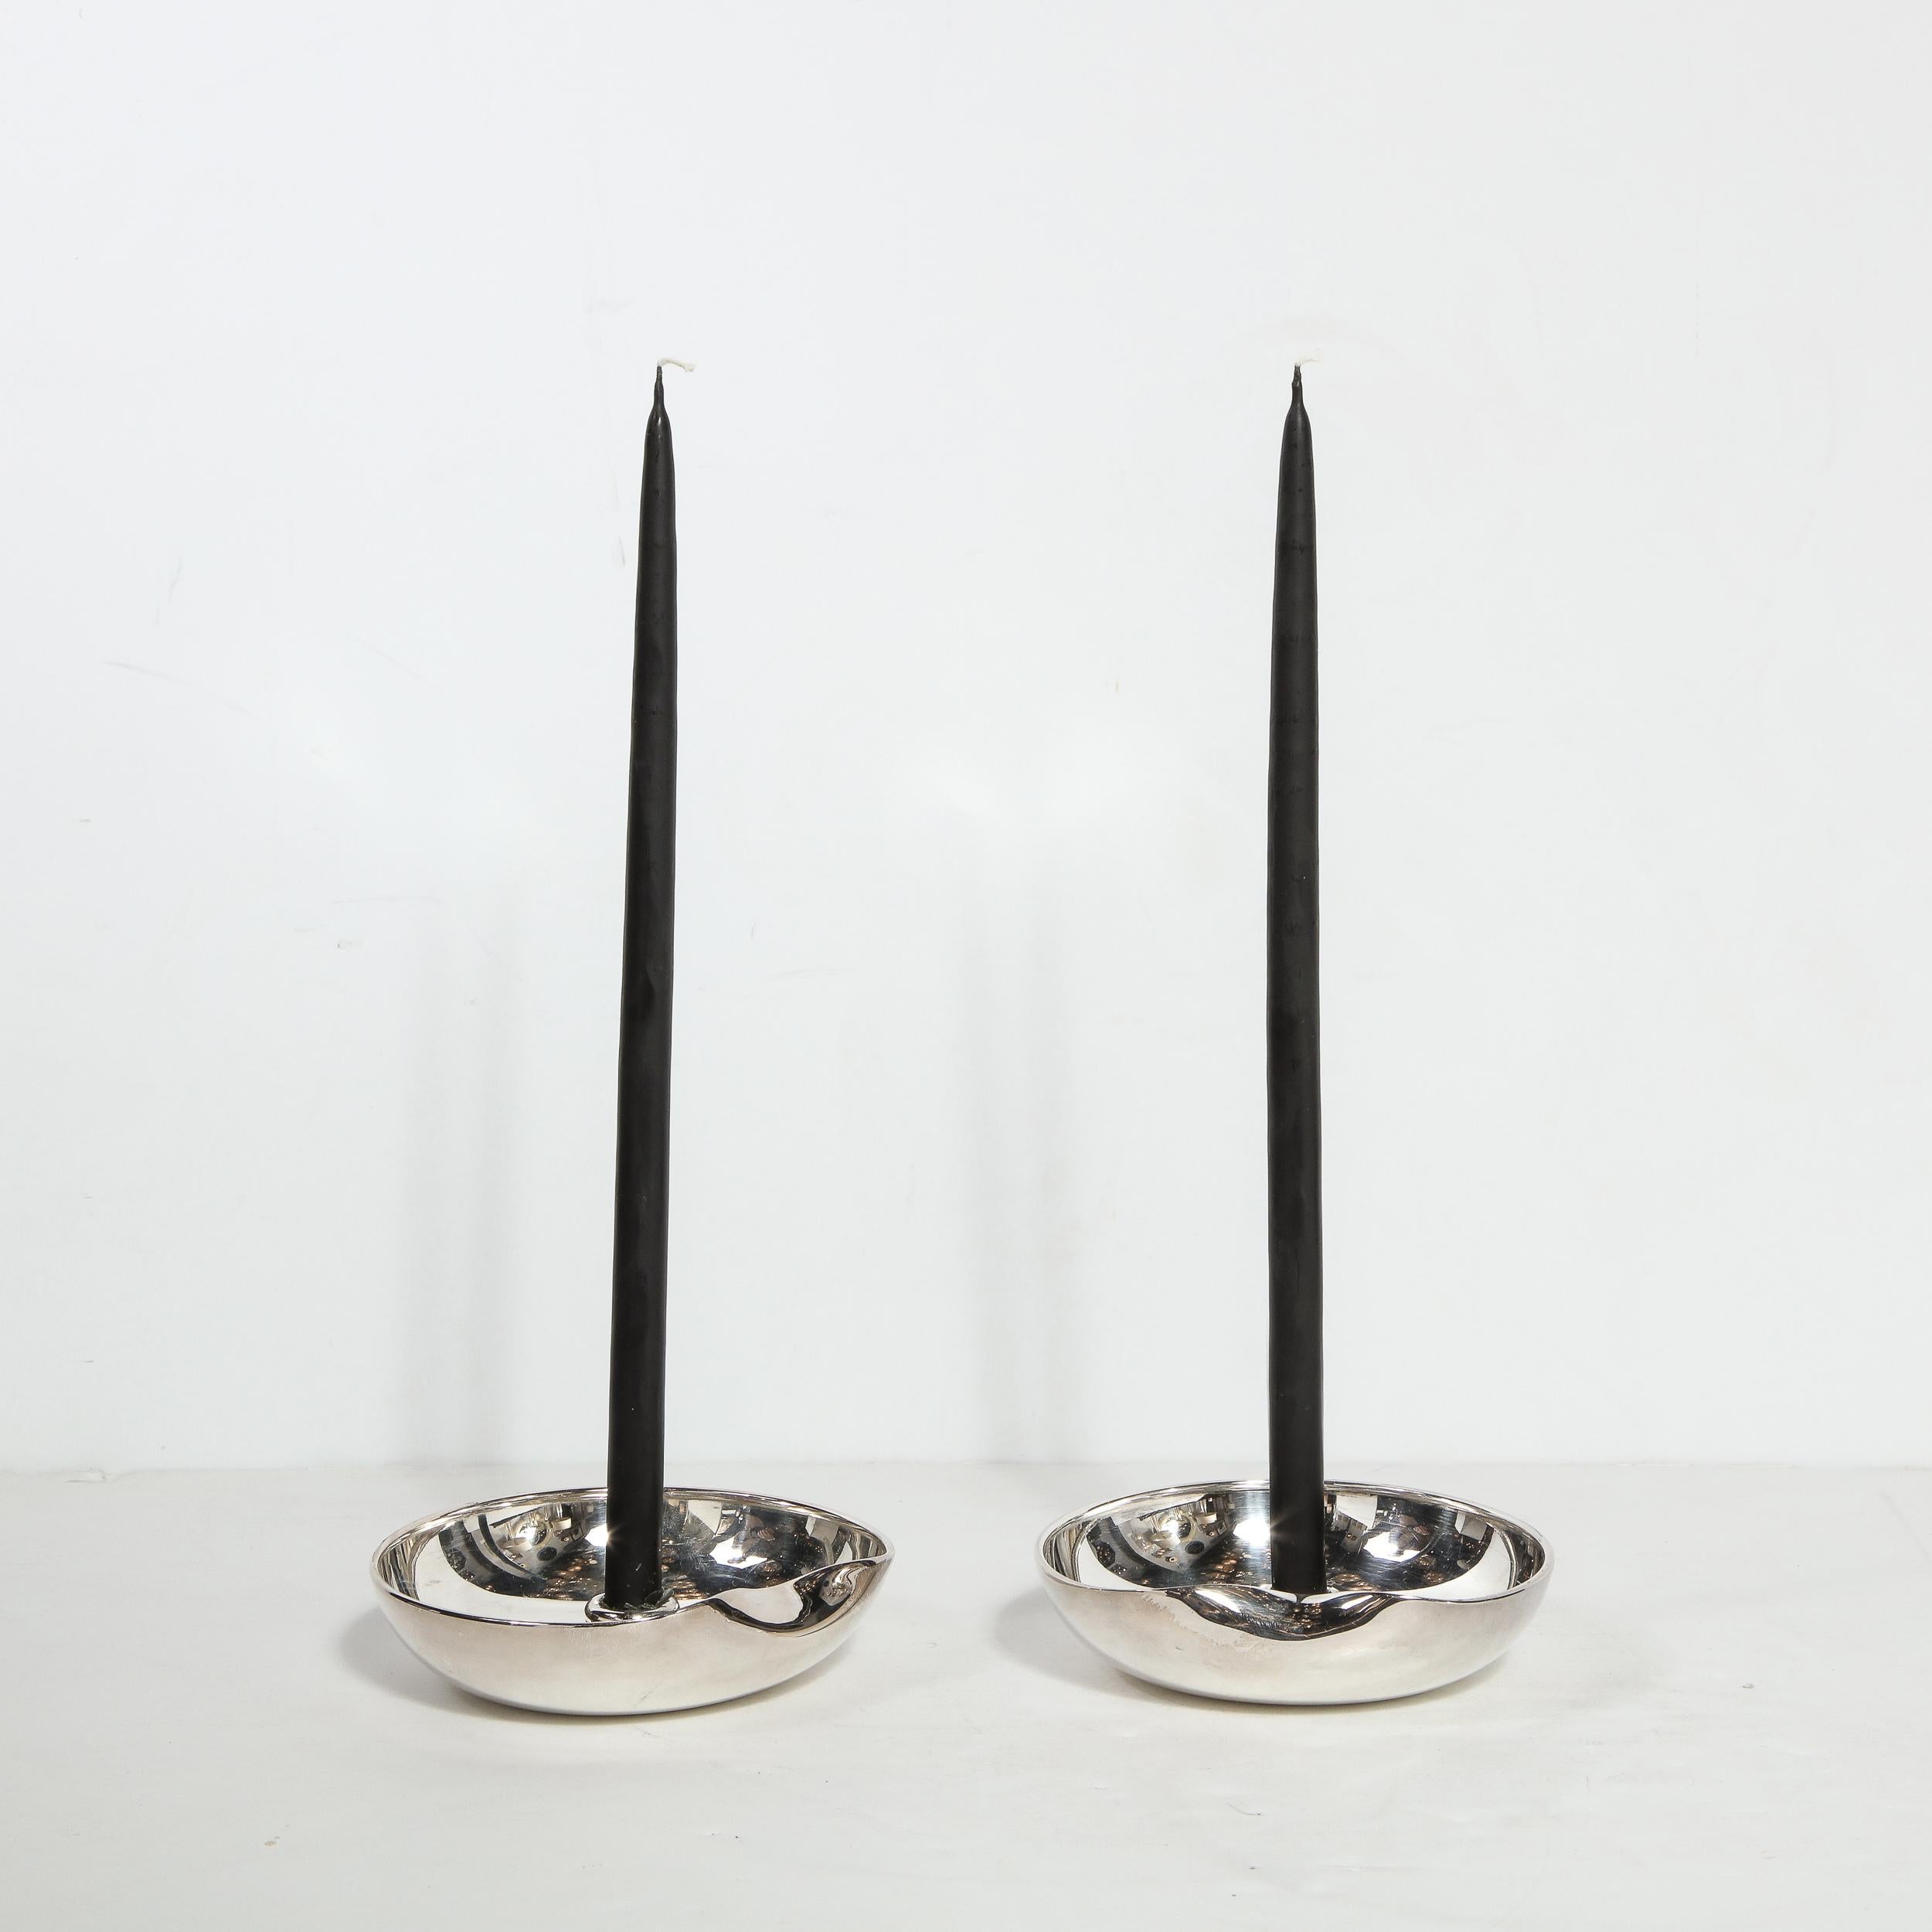 Late 20th Century Pair of Modernist Sterling Candle Holders by Elsa Peretti for Tiffany & Co. For Sale